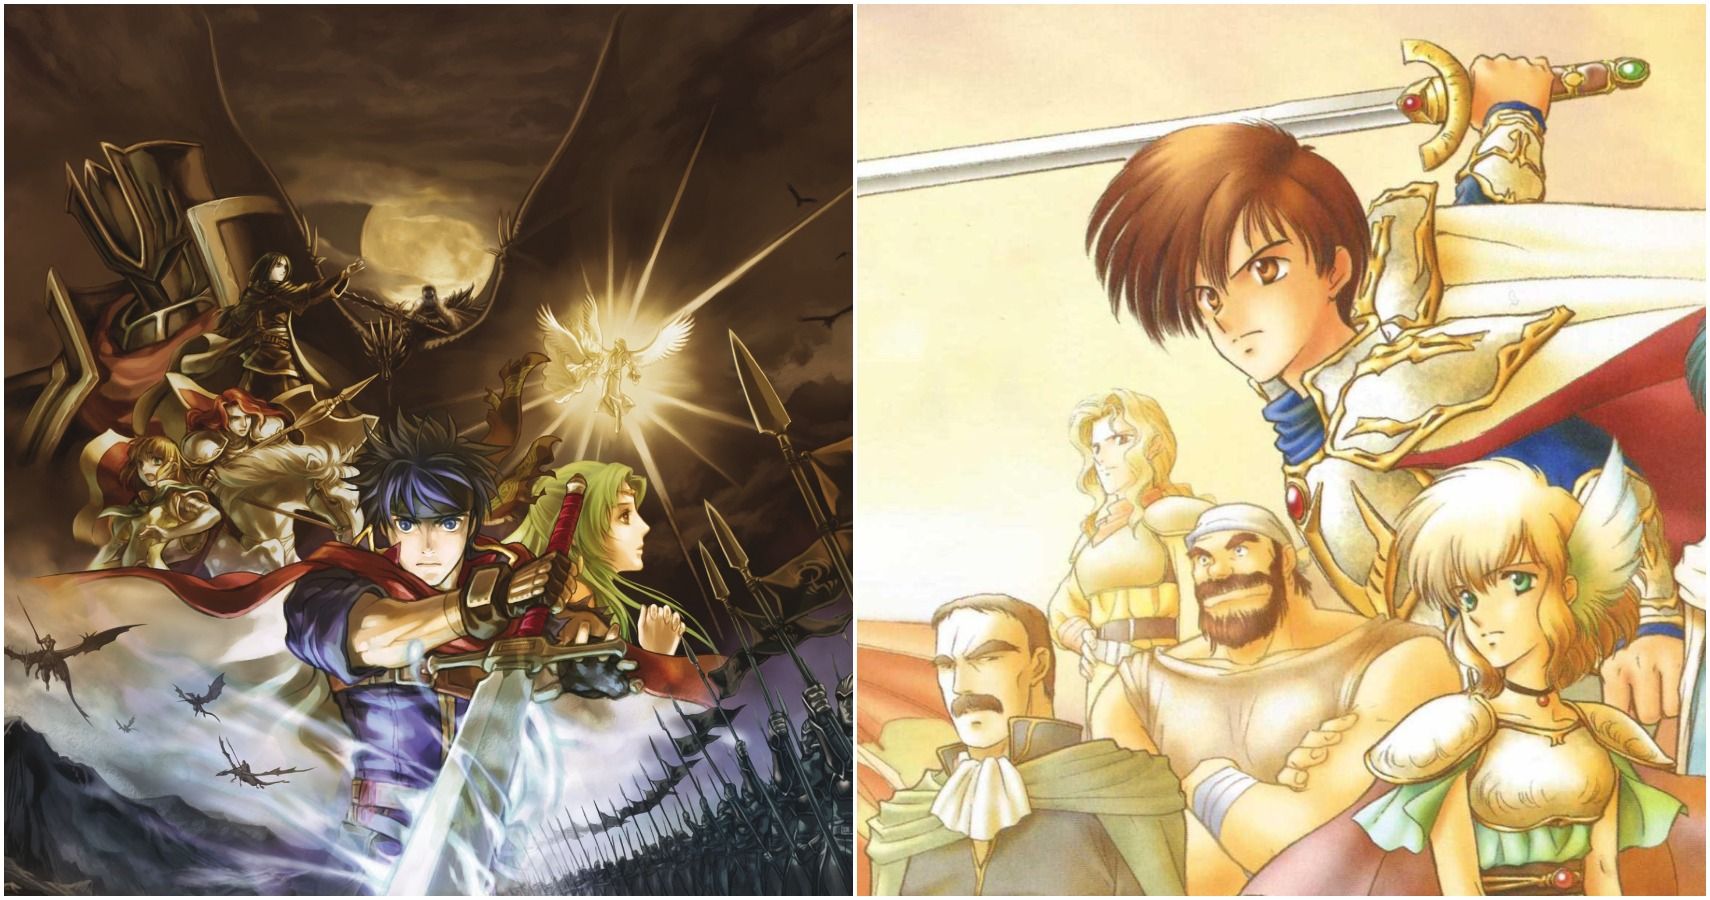 path of radiance and thracia 776 art